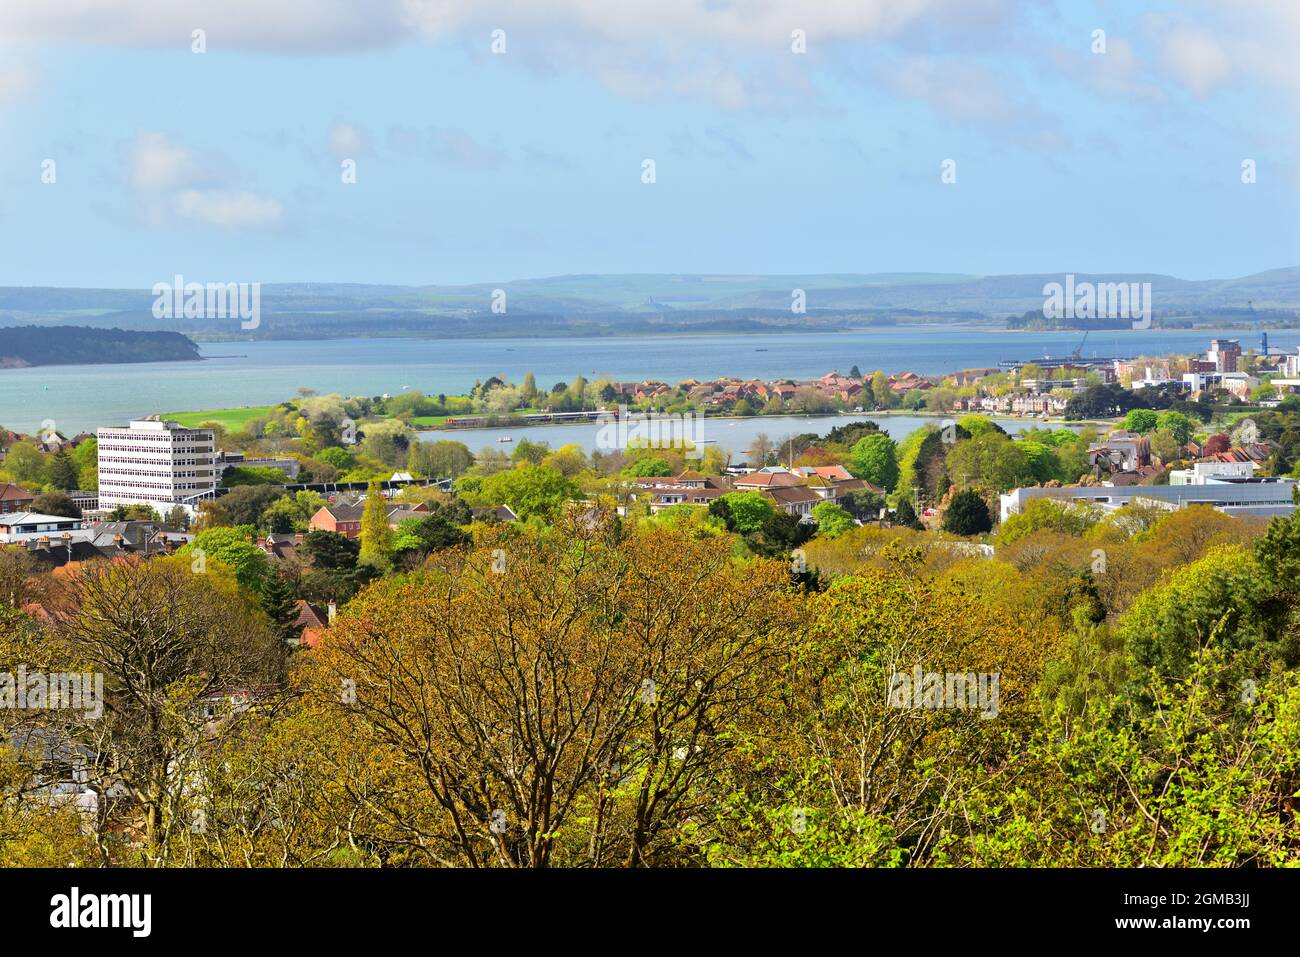 View over Poole Park lake and Poole Harbour, with the Purbeck hills in the background Stock Photo